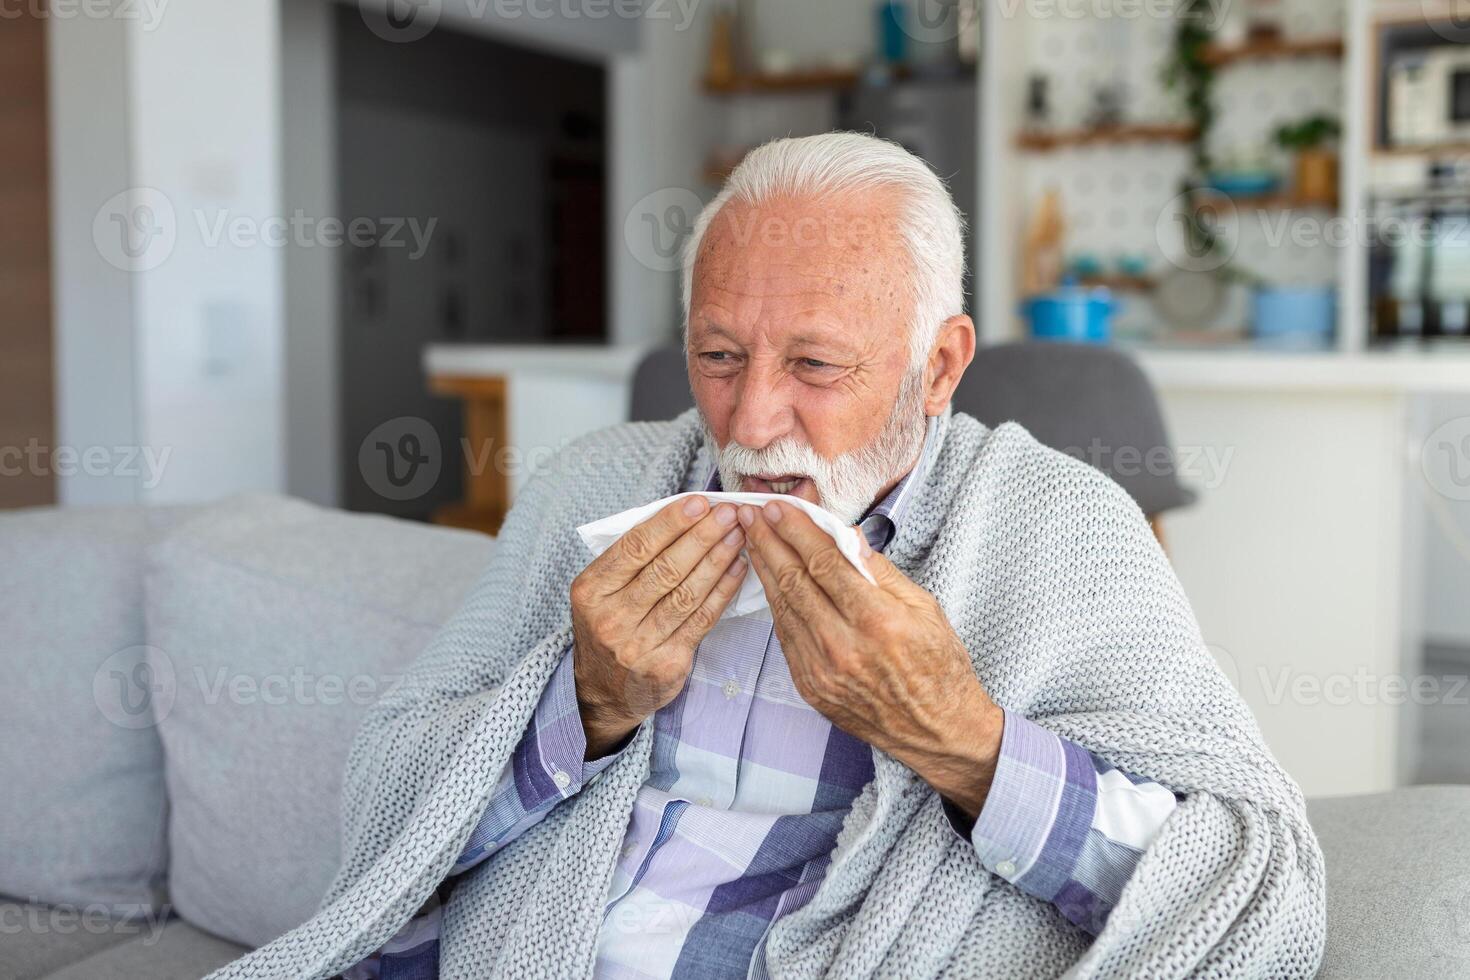 New coronavirus CoVid-19 outbreak situation with pandemic epidemic warning - adult caucasian senior old man with fever symptoms like illness cold seasonal influenza - people and virus concept photo